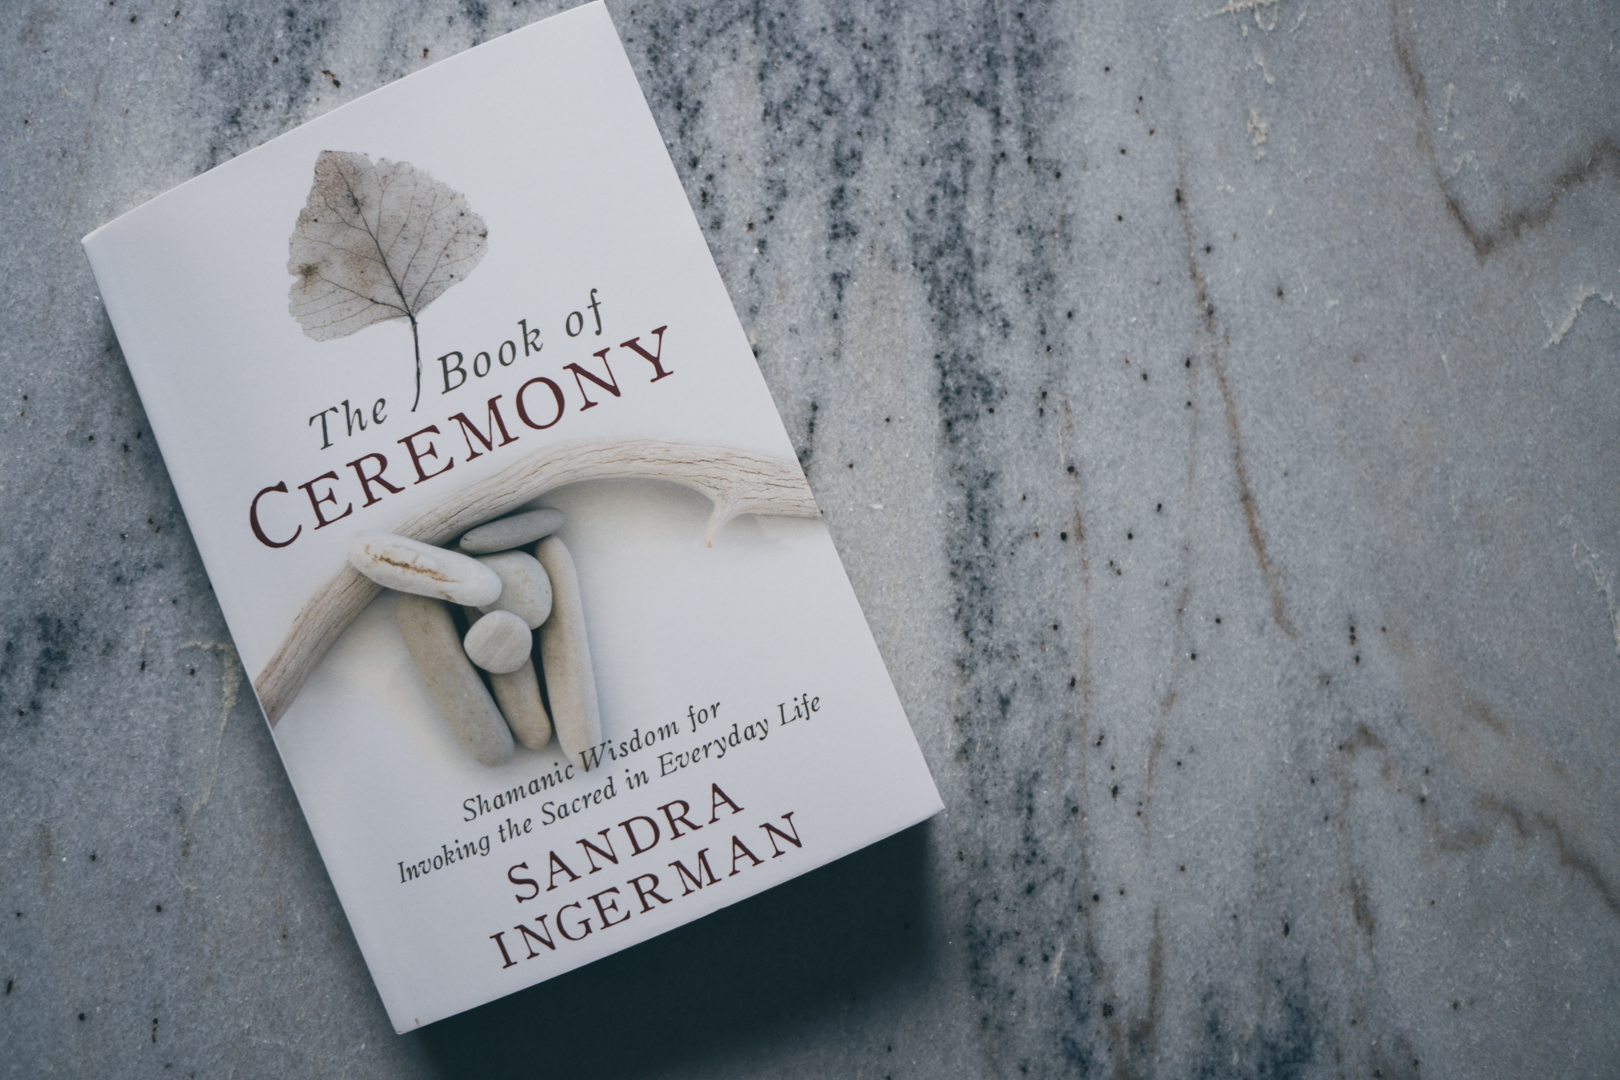 The Book of Ceremony: Shamanic Wisdom for Invoking the Sacred in Everyday Life